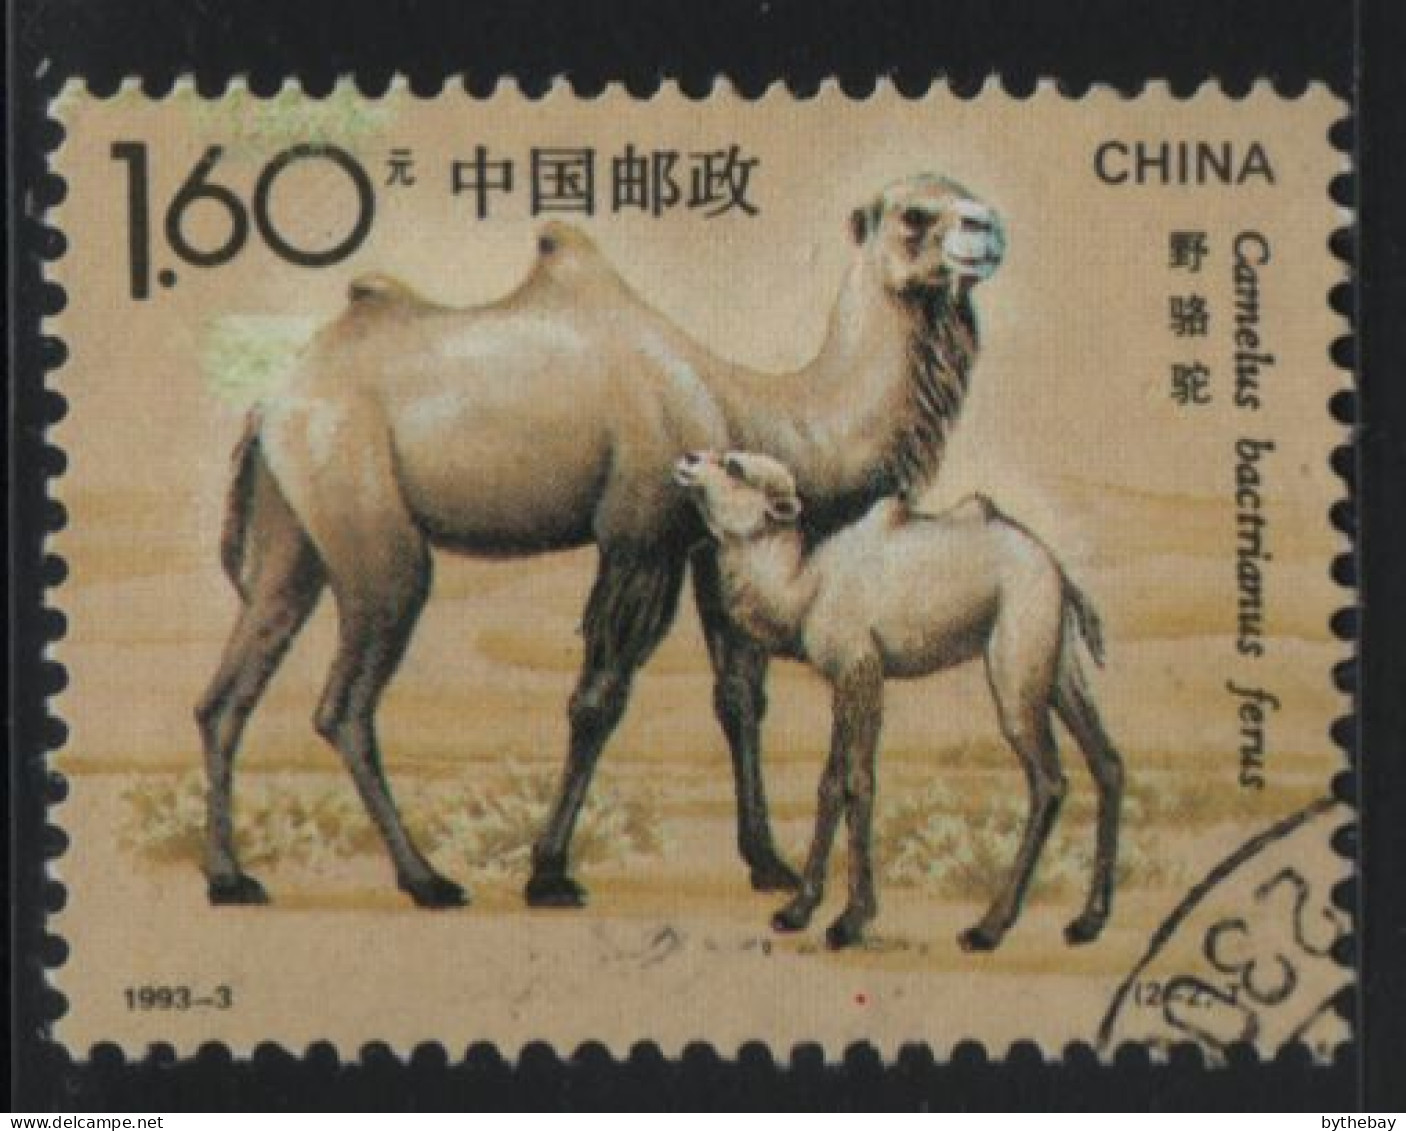 China People's Republic 1993 Used Sc 2434 $1.60 Camels - Usati